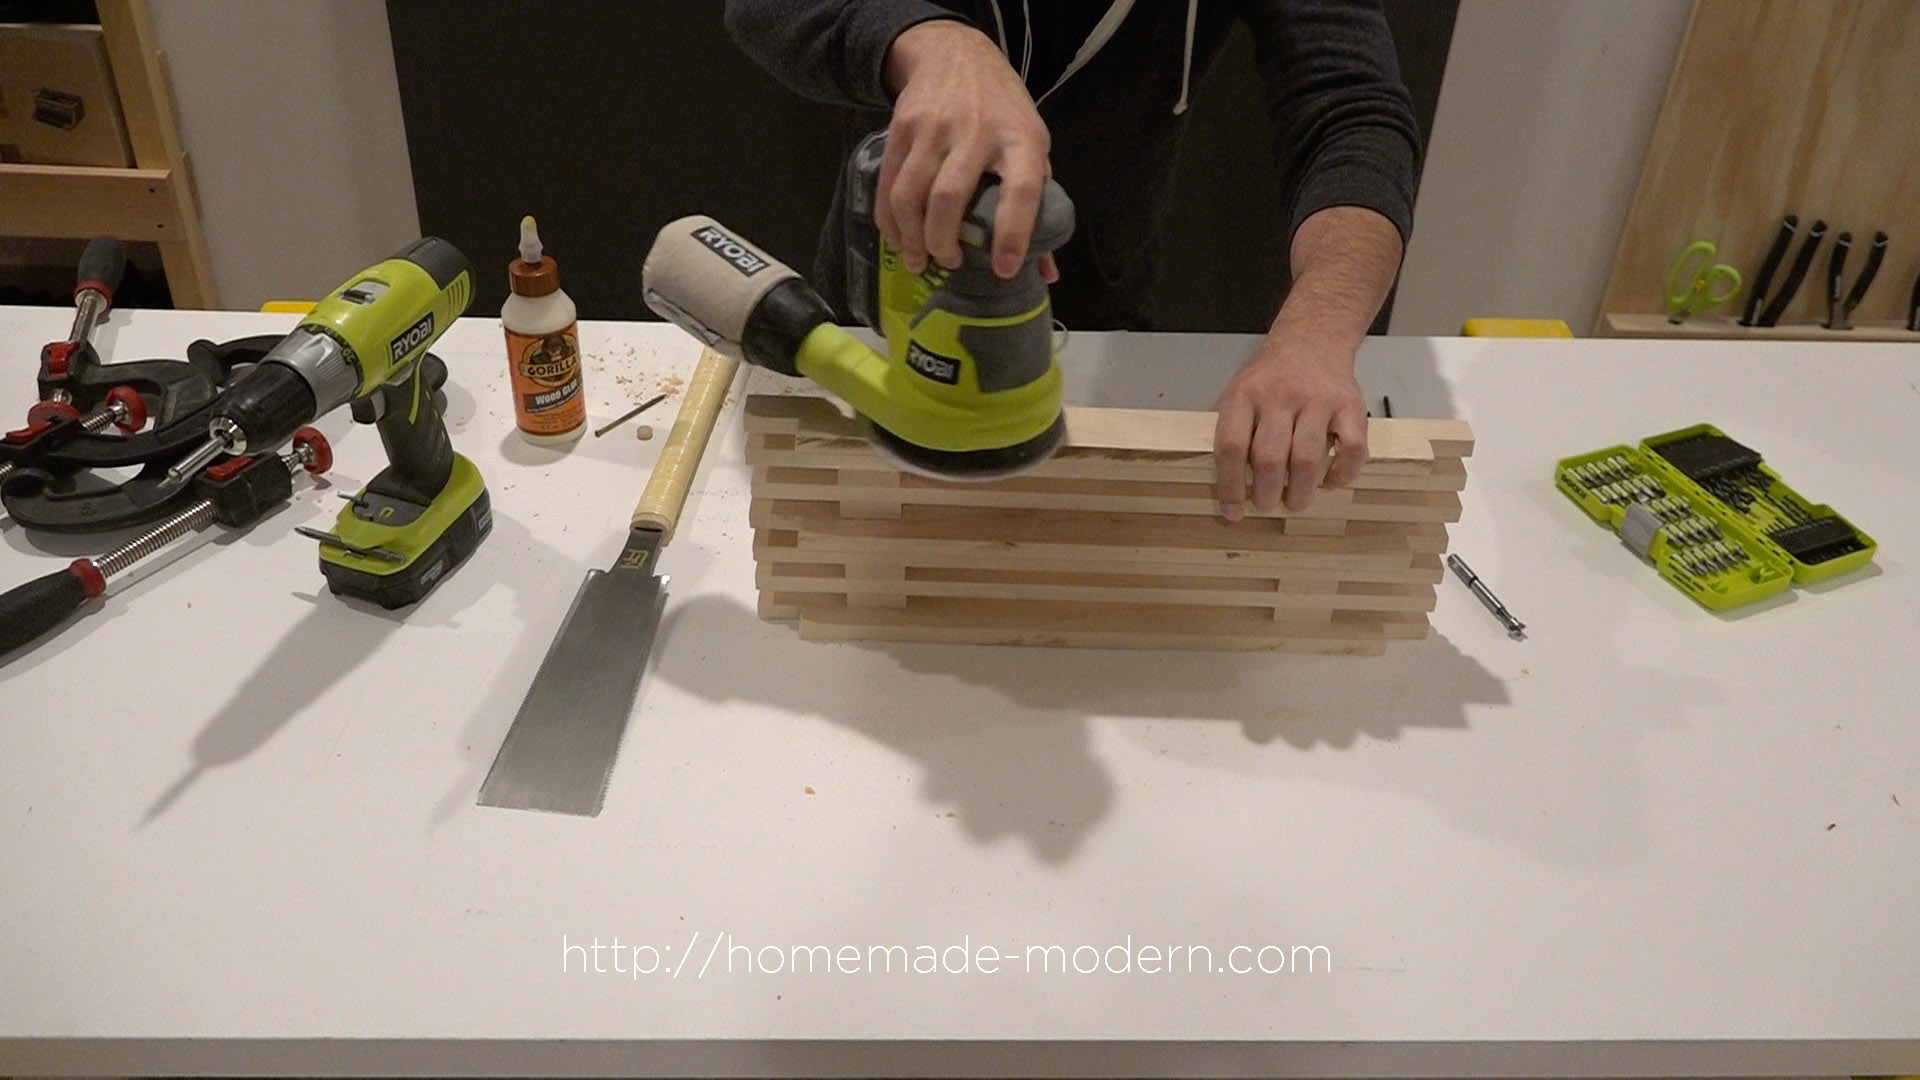 This DIY Dish Rack is designed to fit over a sink. Full instructions can be found at HomeMade-Modern.com